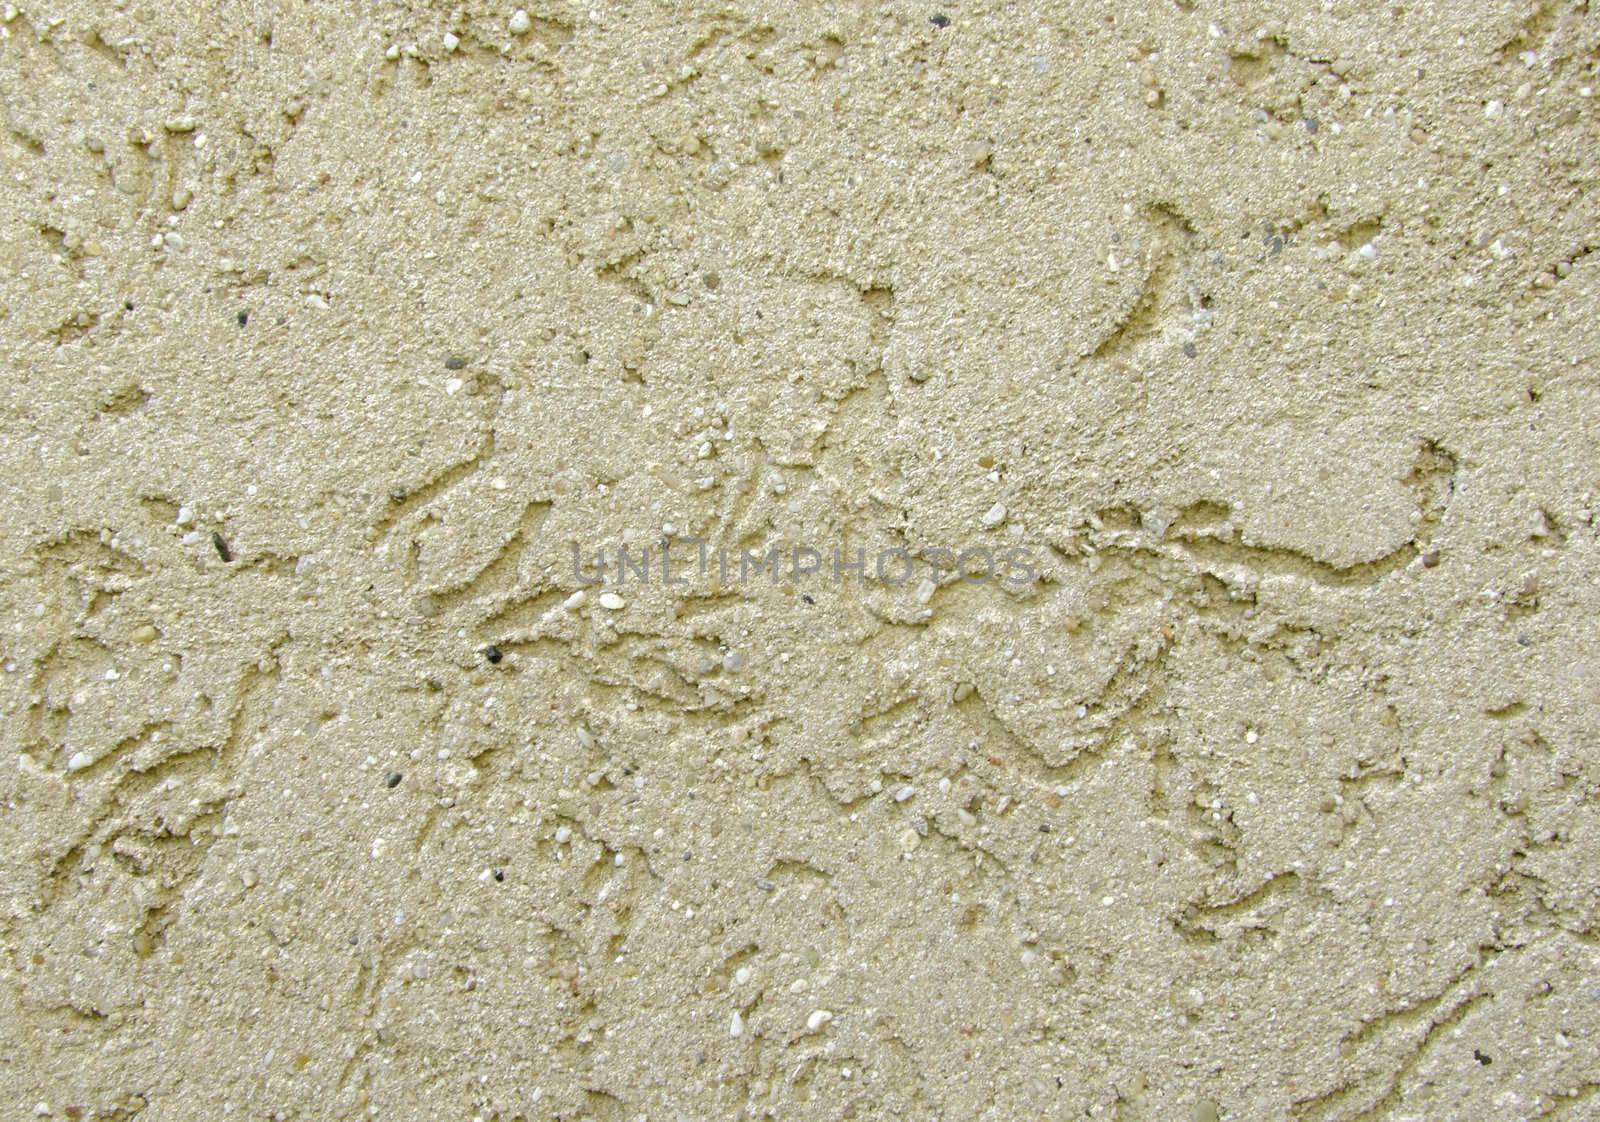 Close-up of a plastered wall